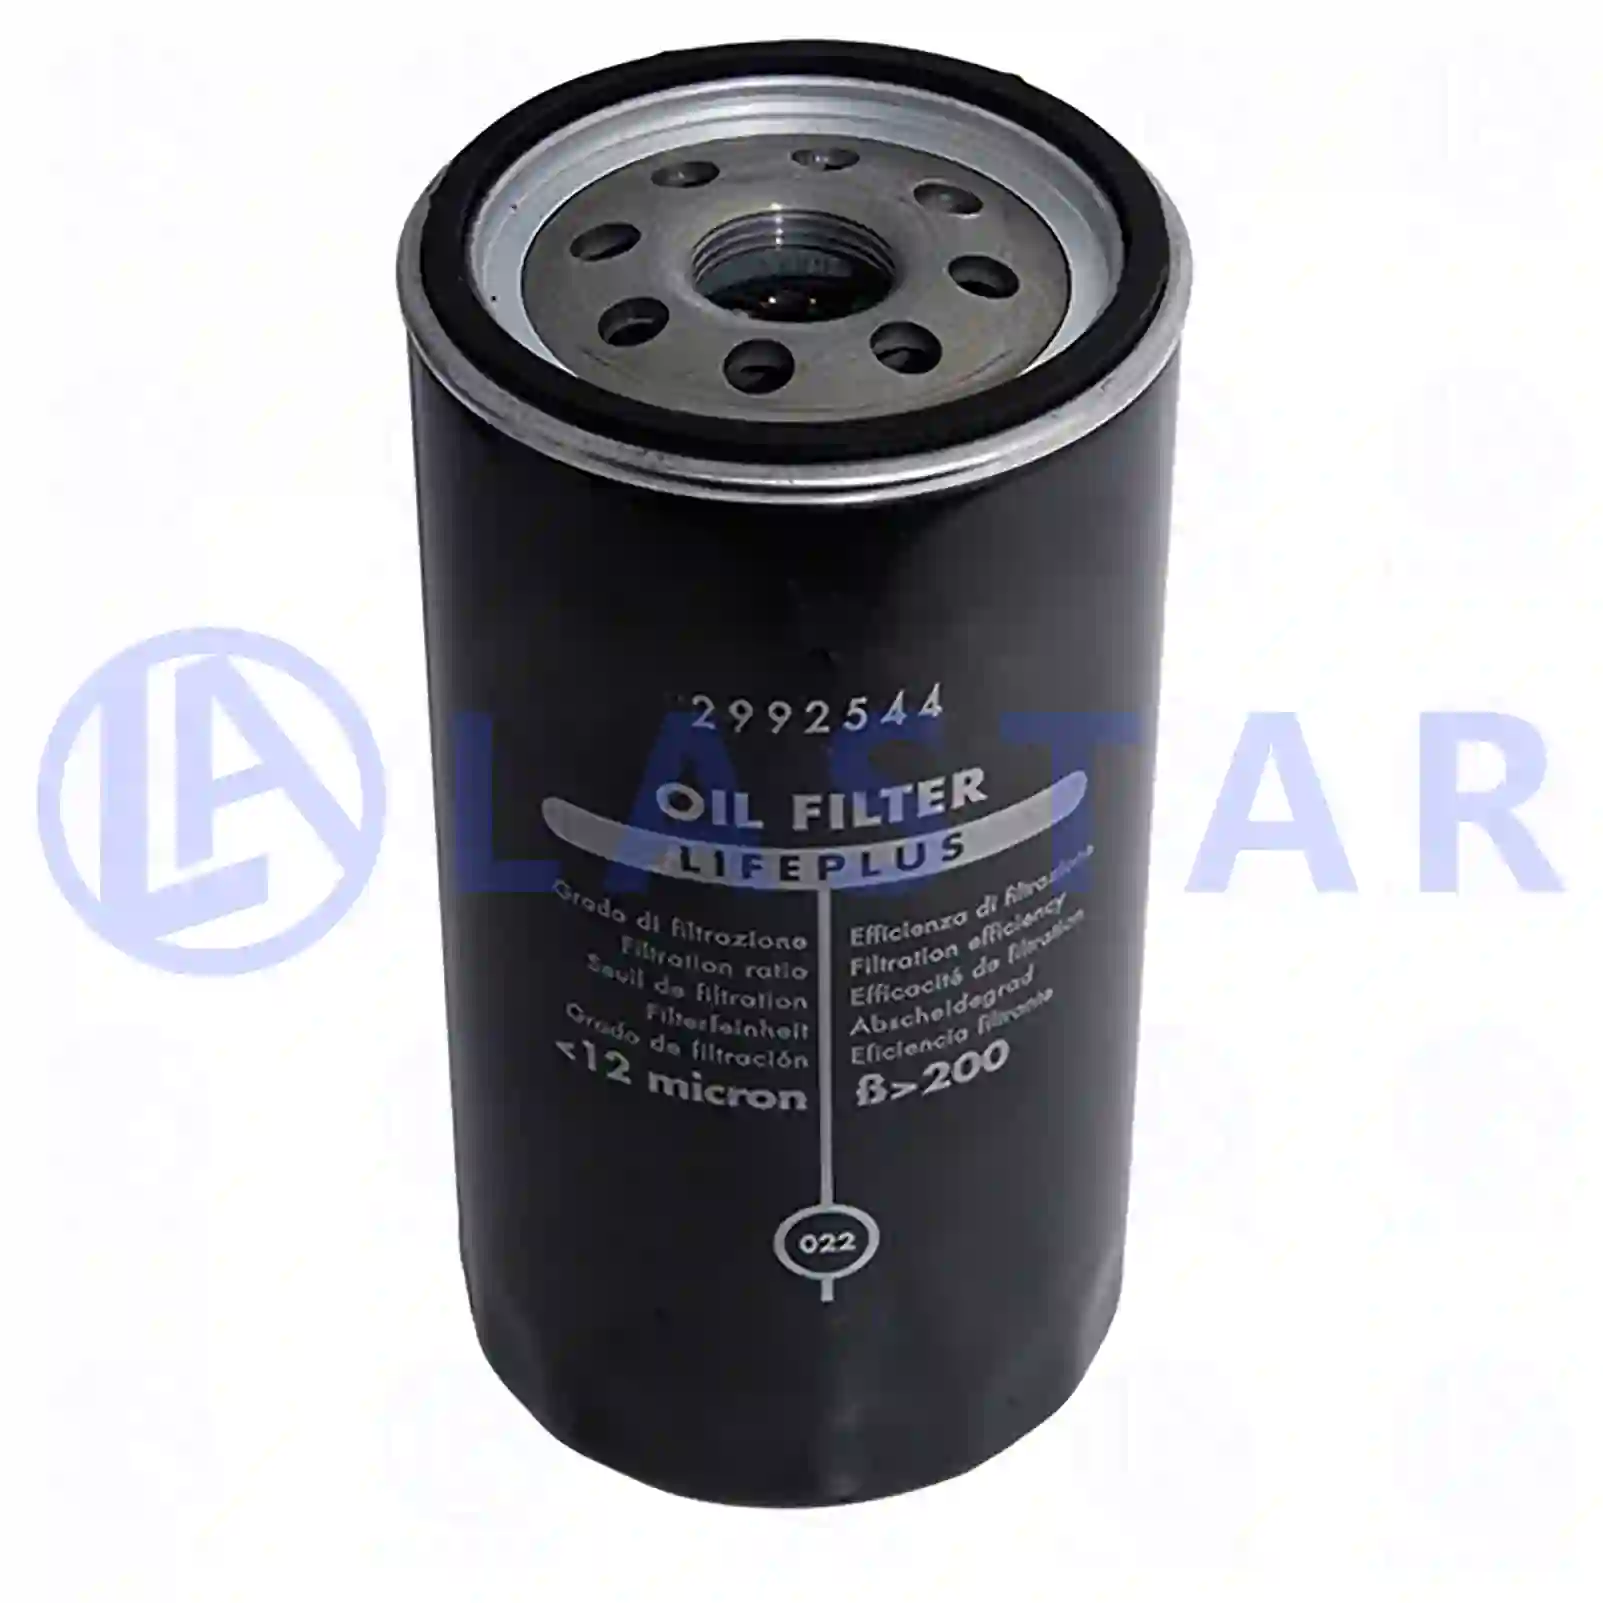 Oil filter, 77700867, 504082382, 1931099, 84346773, 02992544, 99445200, H230W, 02943301, 02992544, 02997141, 2992544, 504026056, 504082382, 5802037413, 99445200, 01931099, 84346773, 5001858099, 5001863139, 5021188548, ZG01713-0008 ||  77700867 Lastar Spare Part | Truck Spare Parts, Auotomotive Spare Parts Oil filter, 77700867, 504082382, 1931099, 84346773, 02992544, 99445200, H230W, 02943301, 02992544, 02997141, 2992544, 504026056, 504082382, 5802037413, 99445200, 01931099, 84346773, 5001858099, 5001863139, 5021188548, ZG01713-0008 ||  77700867 Lastar Spare Part | Truck Spare Parts, Auotomotive Spare Parts